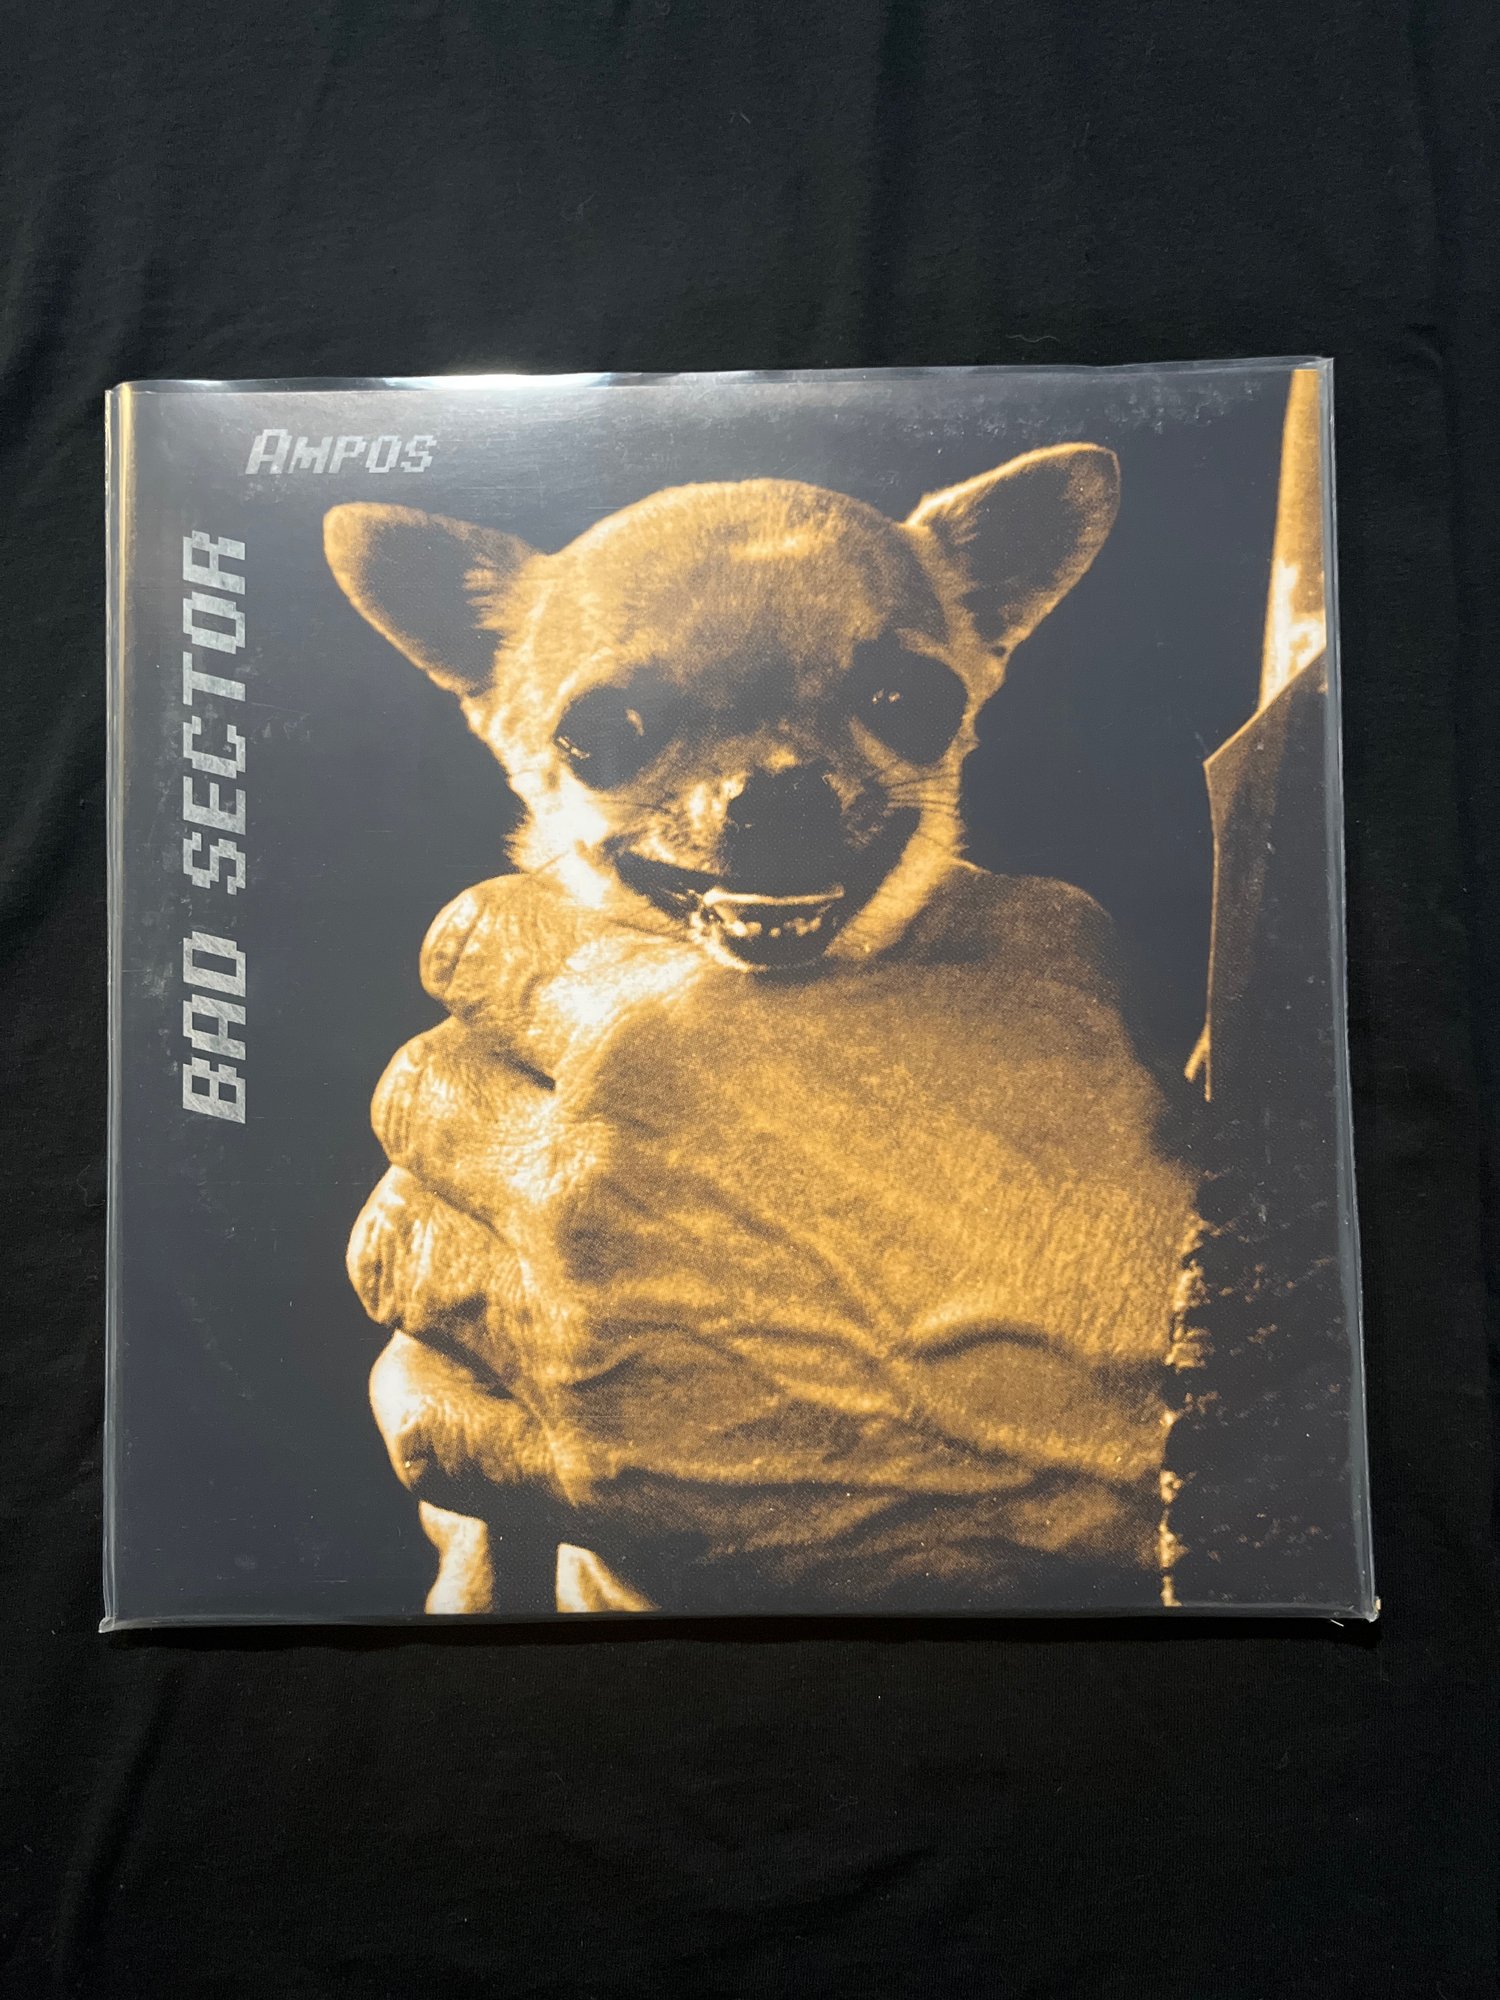 Bad Sector - Ampos Expanded 25th Anniversary Edition 2xLP (OEC)